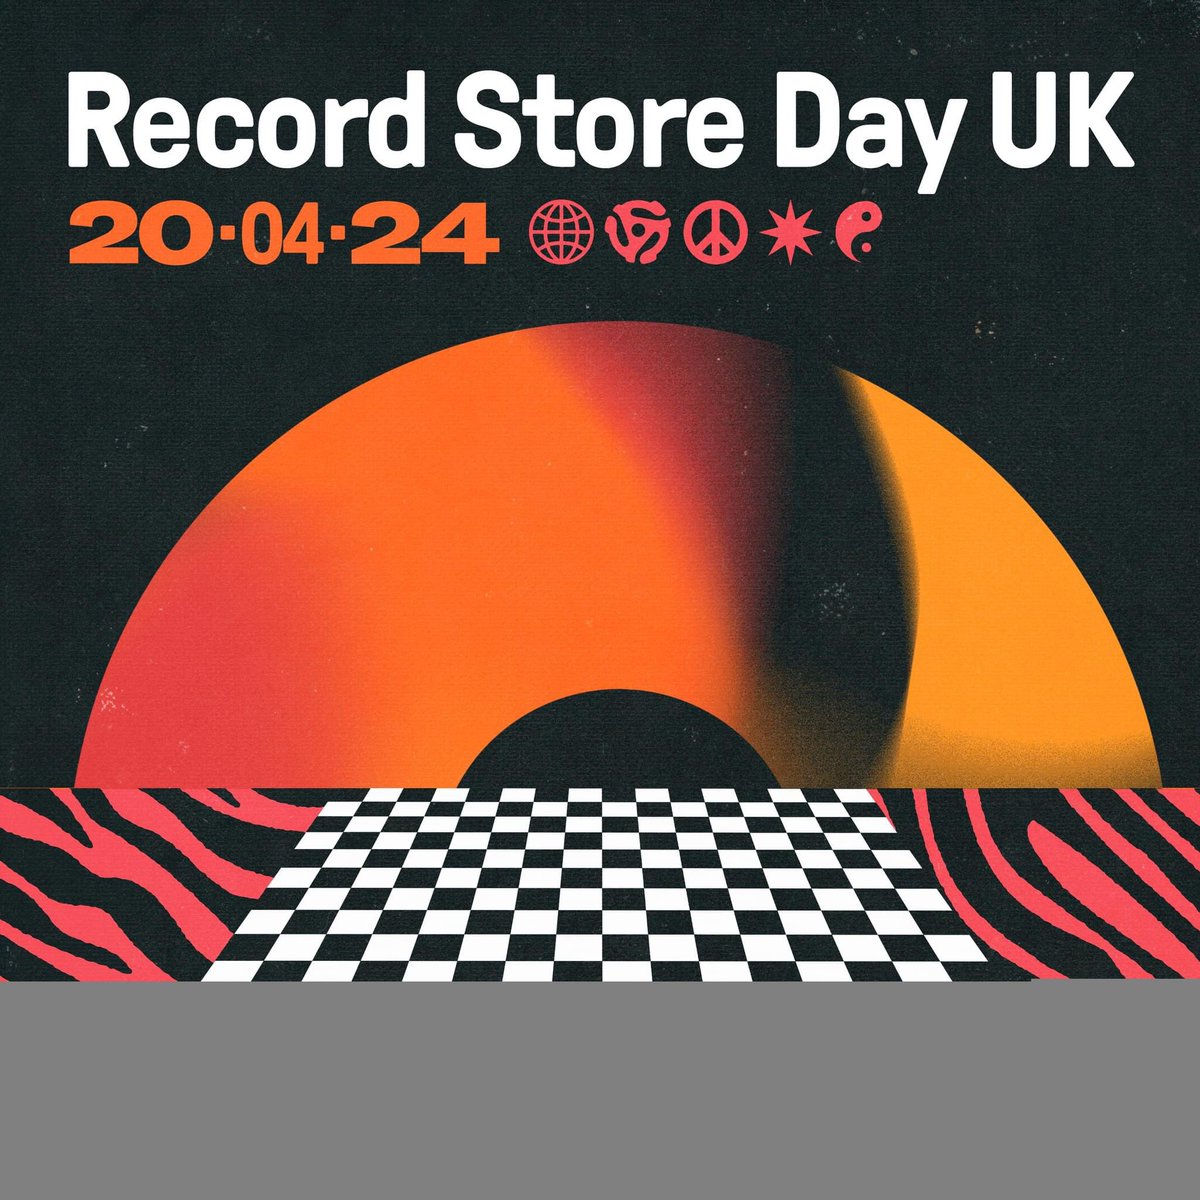 The @recordstoreday ‘WISH’ list deadline has been moved to THURS 14 MARCH. We want to try and get you exactly what you are after. So, please let us know to avoid disappointment😀😀😀 #recordstoreday2024 #phoenixsounds #independentrecordstore #newtonabbot